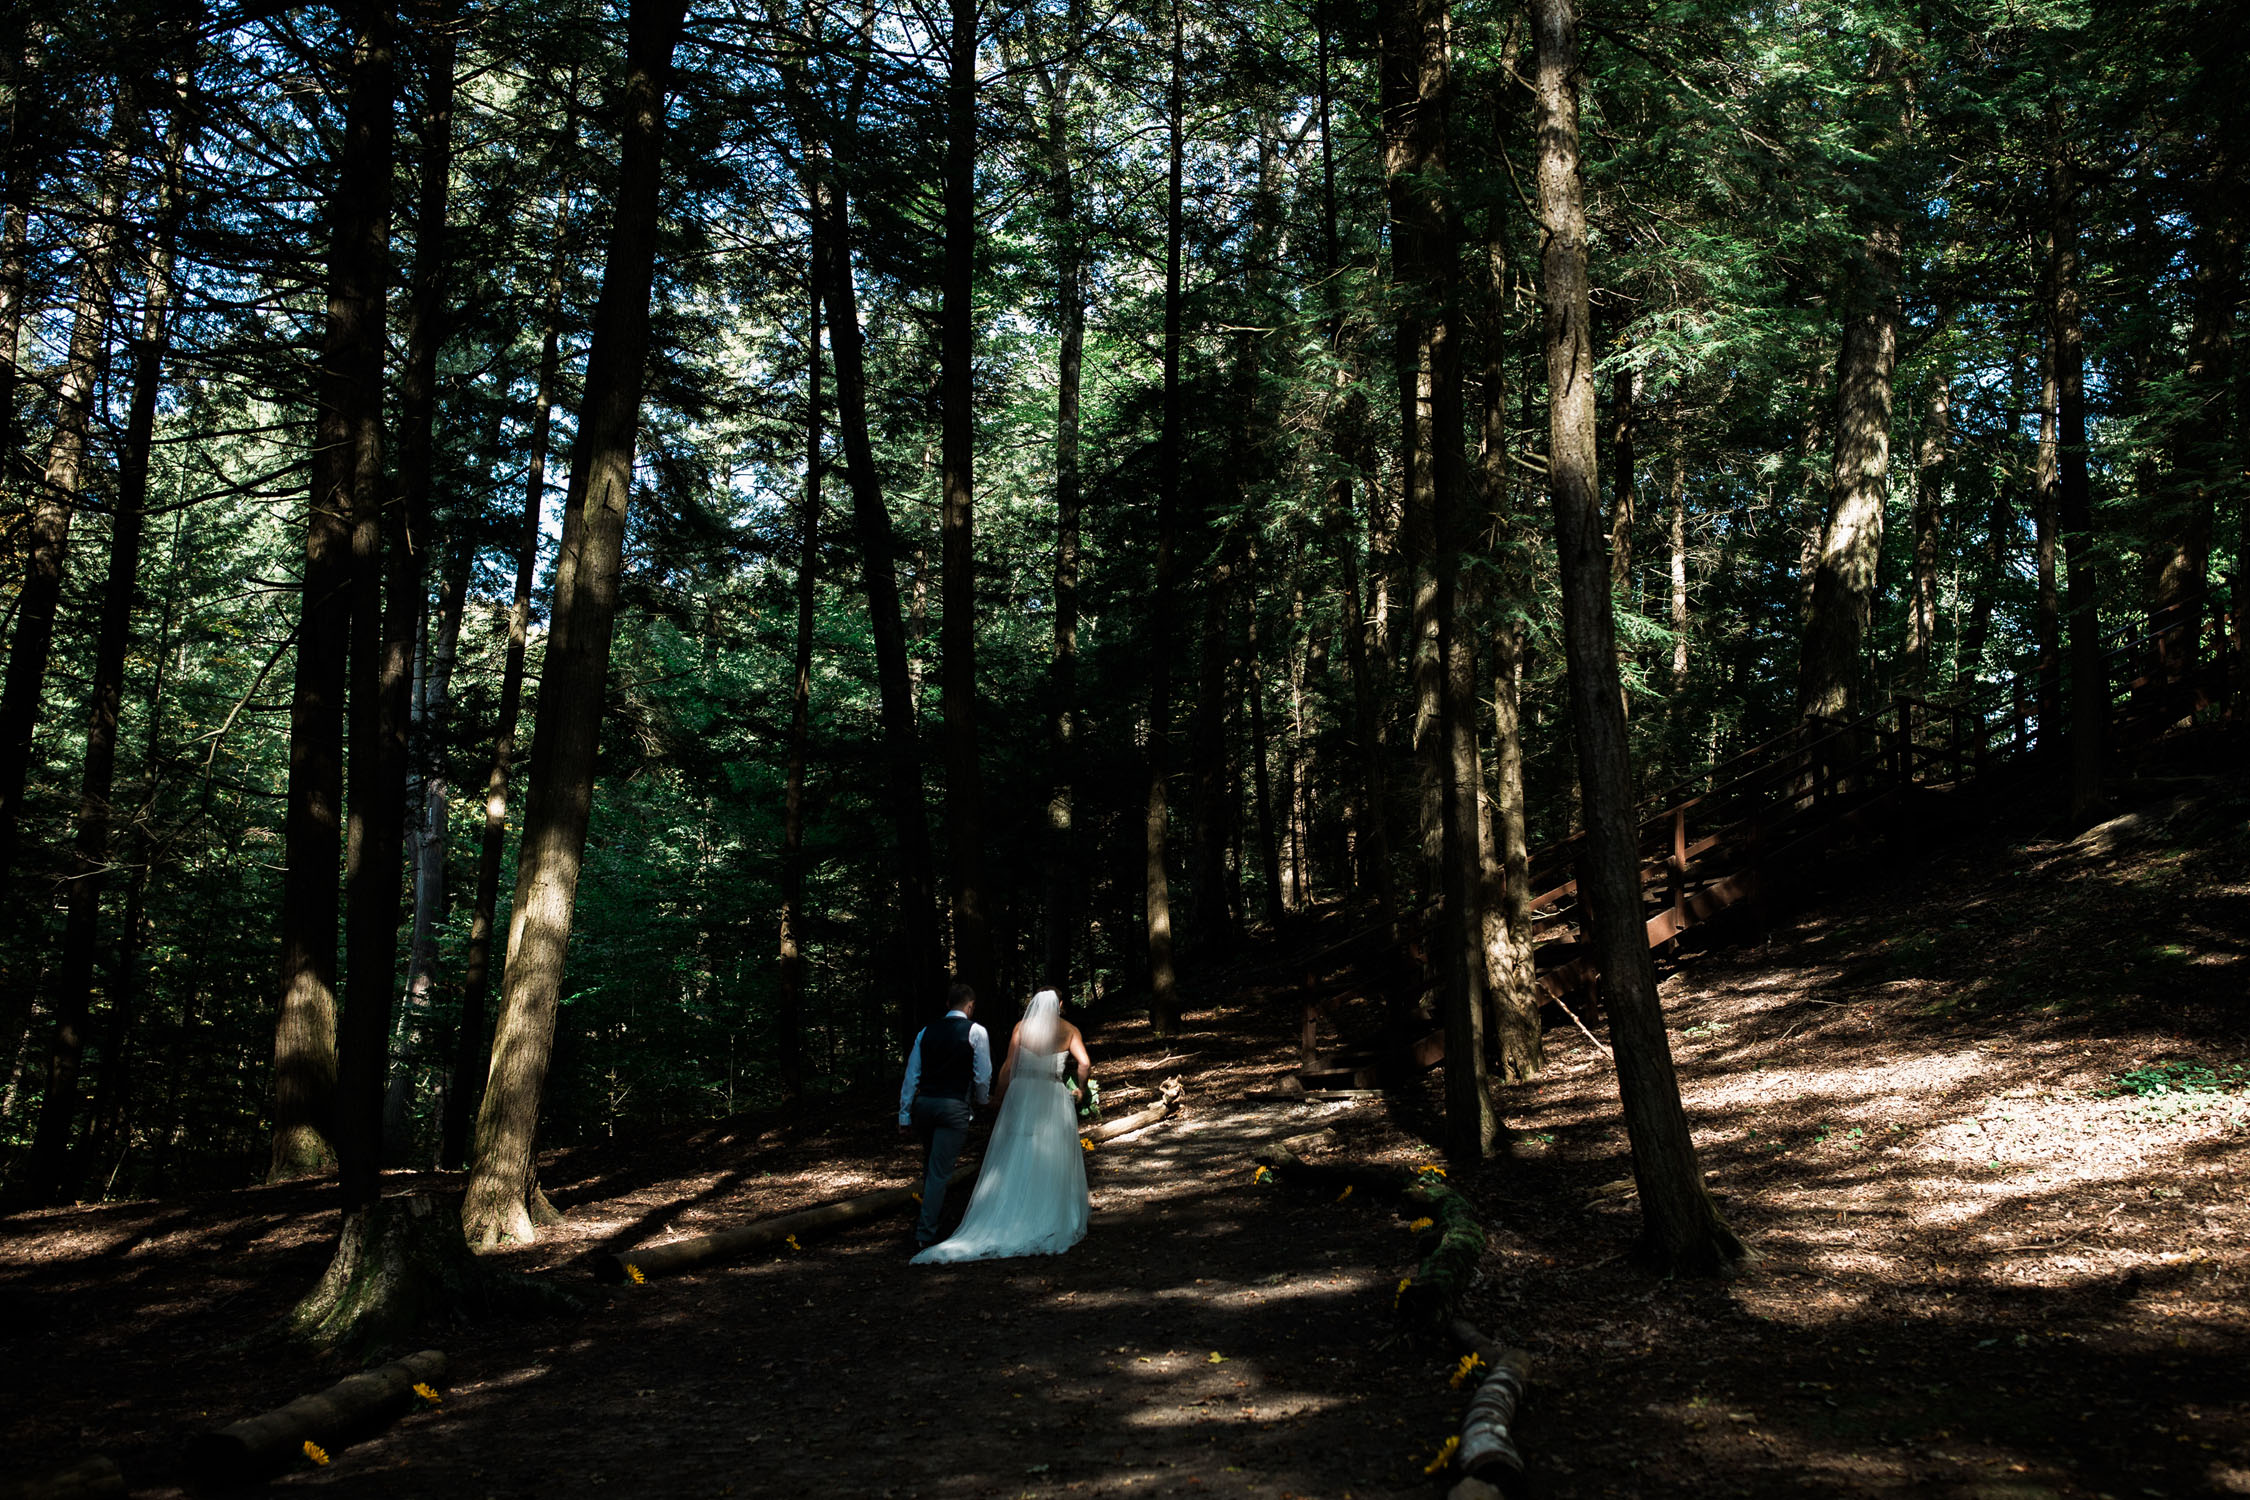 Newly married couple walking hand and hand through the forest.